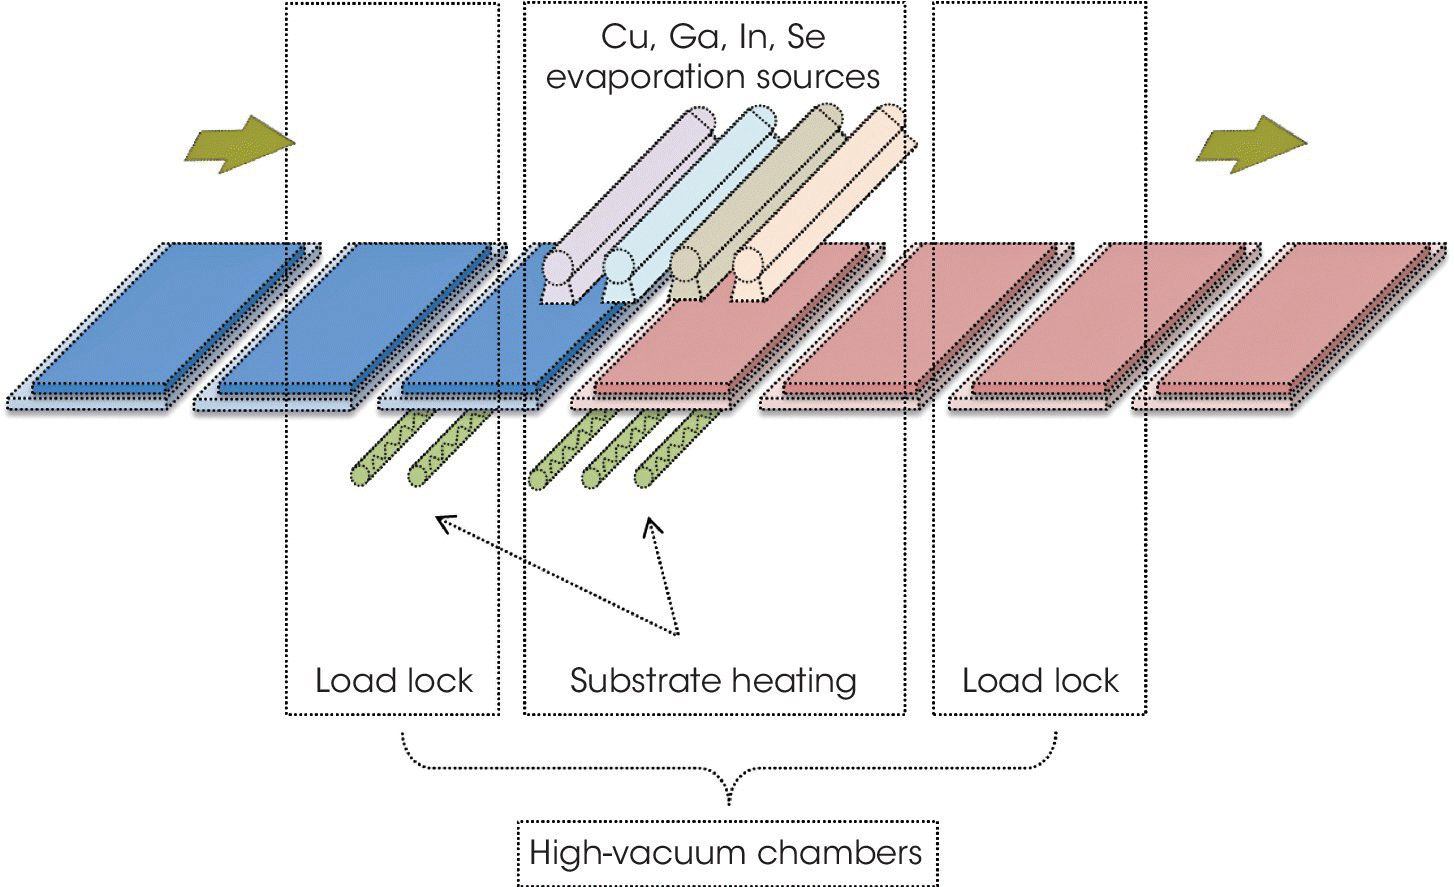 Process schematic for CIGS PV, from load lock (left) to substrate heating with Cu, Ga, In, Se evaporation sources (middle) and to load lock (right).